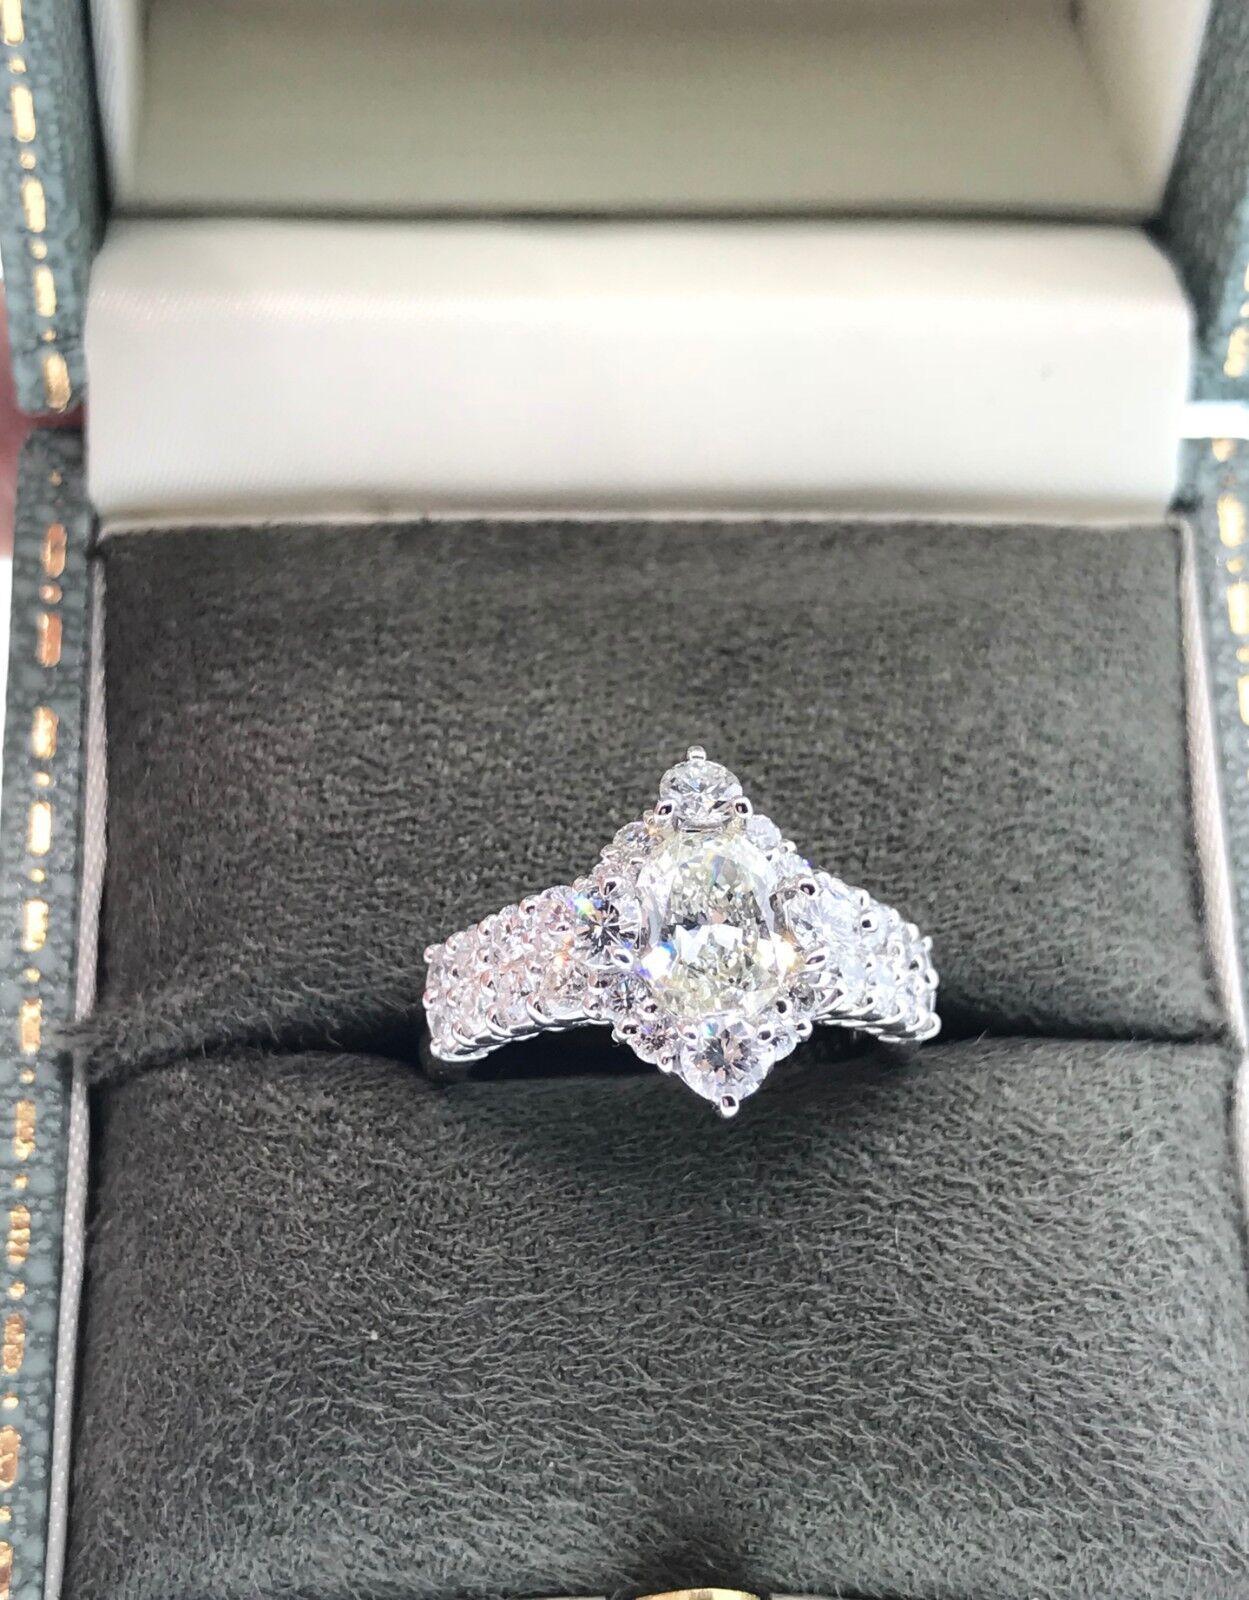 Oval Brilliant Diamond Ring in Platinum

Oval Brilliant Diamond Ring features an Oval Brilliant cut Diamond center surrounded by a halo of Round Brilliant Diamonds set in a Platinum setting.

The center diamond weighs 1.00 carat.
Total weight of